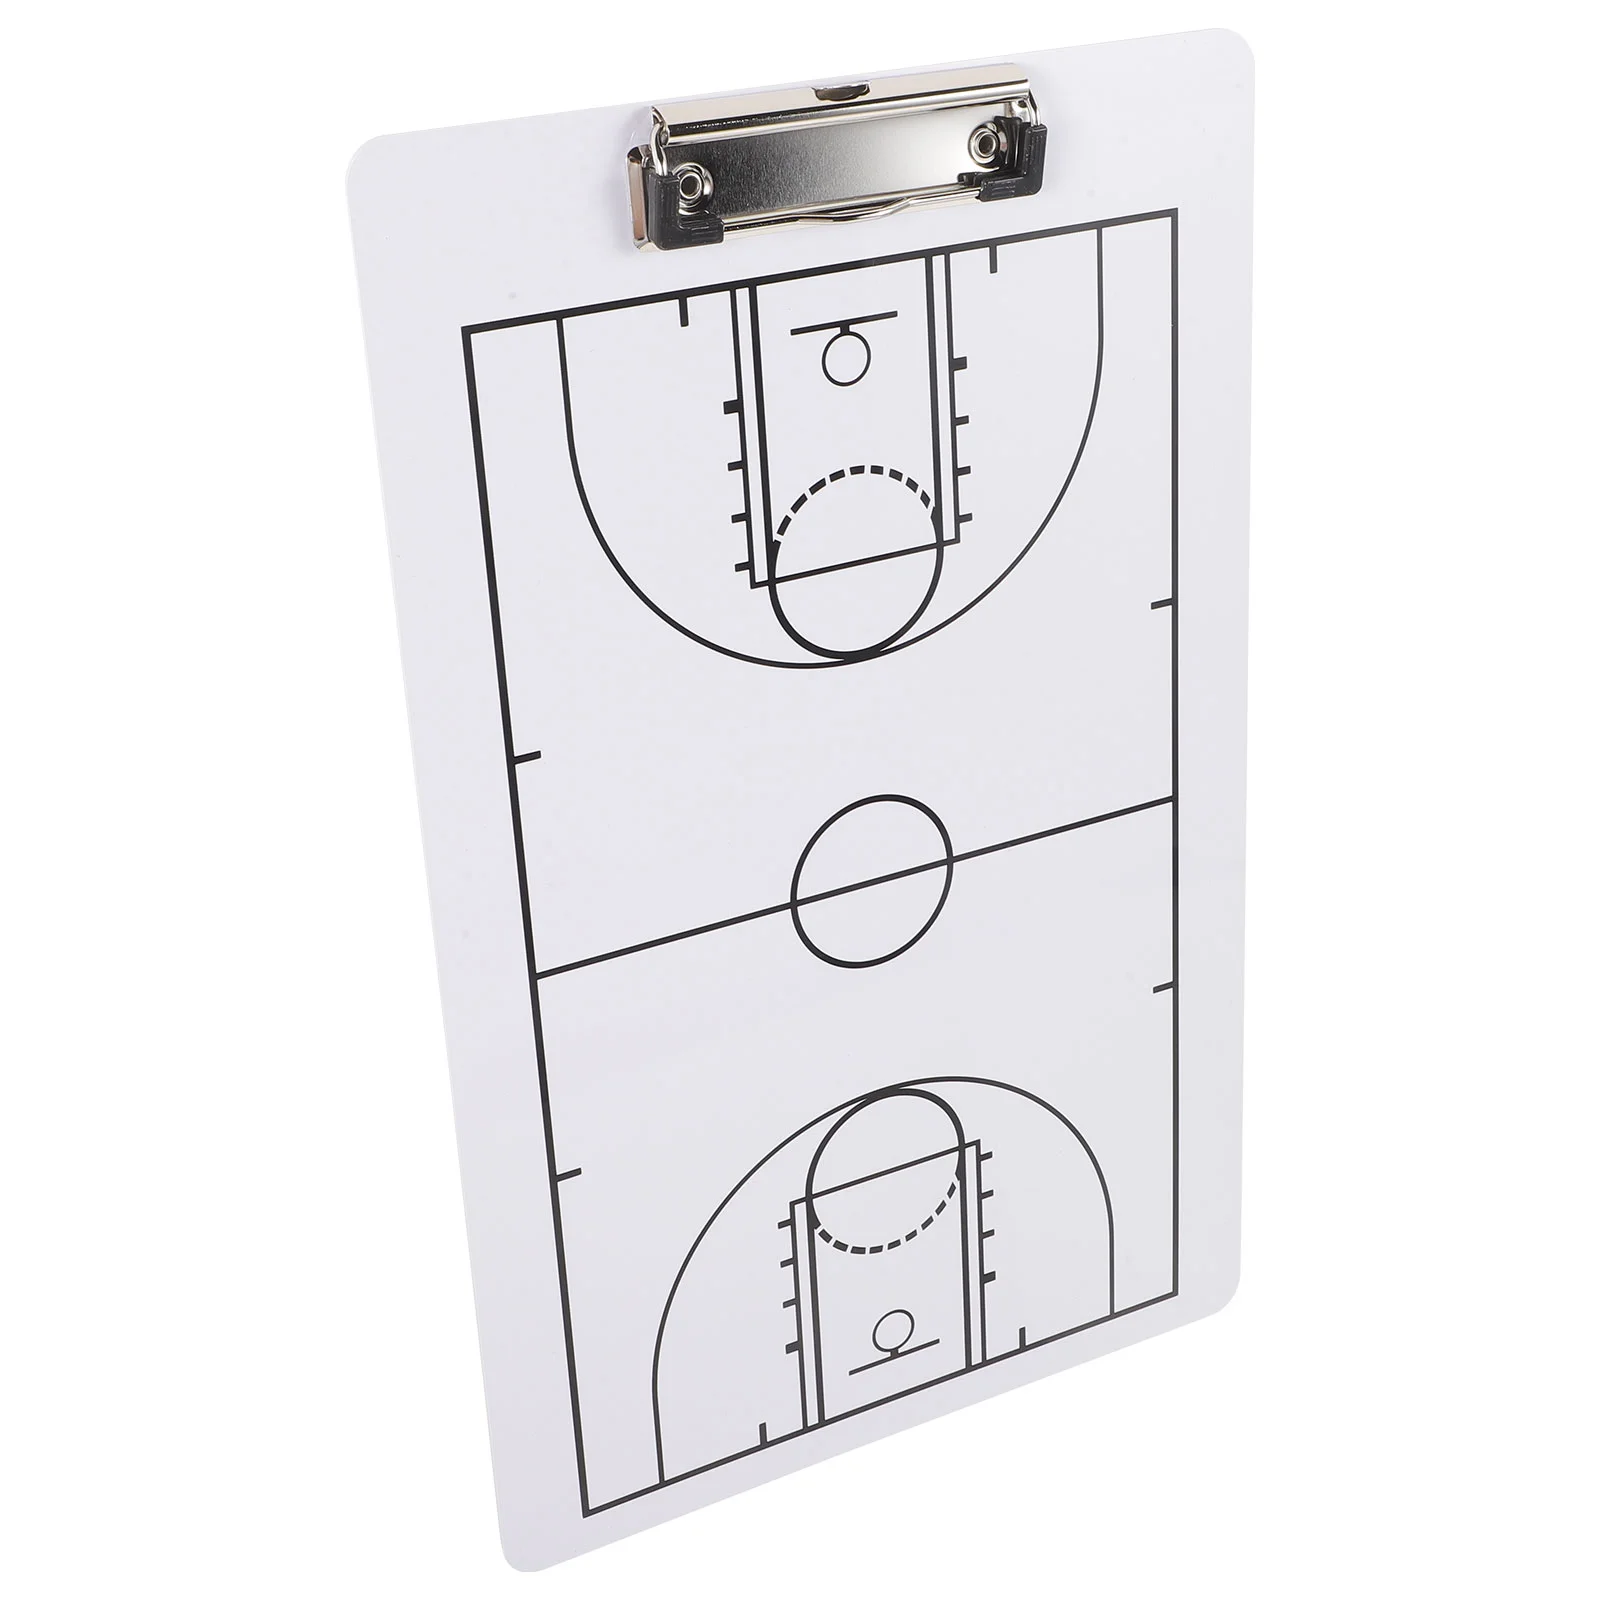 

Substitution Card Home Plate Baseball Match Tactic Sports Competition Game Basketball Tactics Board Pvc Useful Creative Coaches